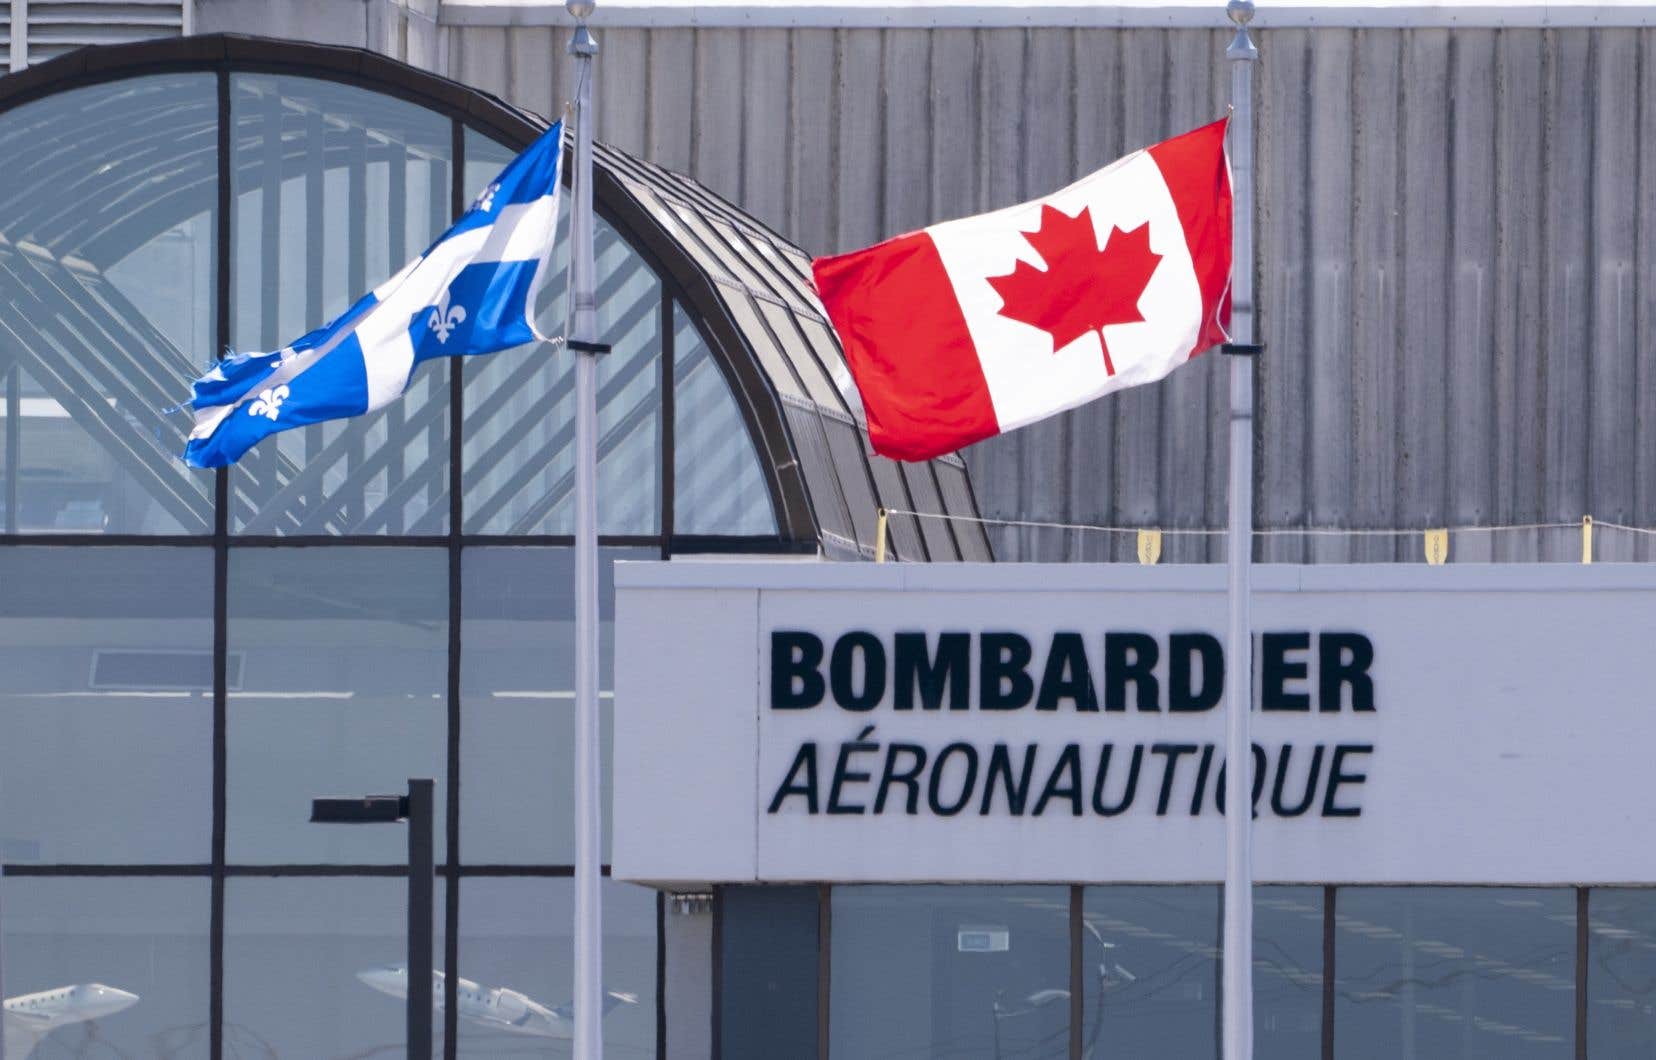 Collective agreement negotiations get tough at Bombardier

